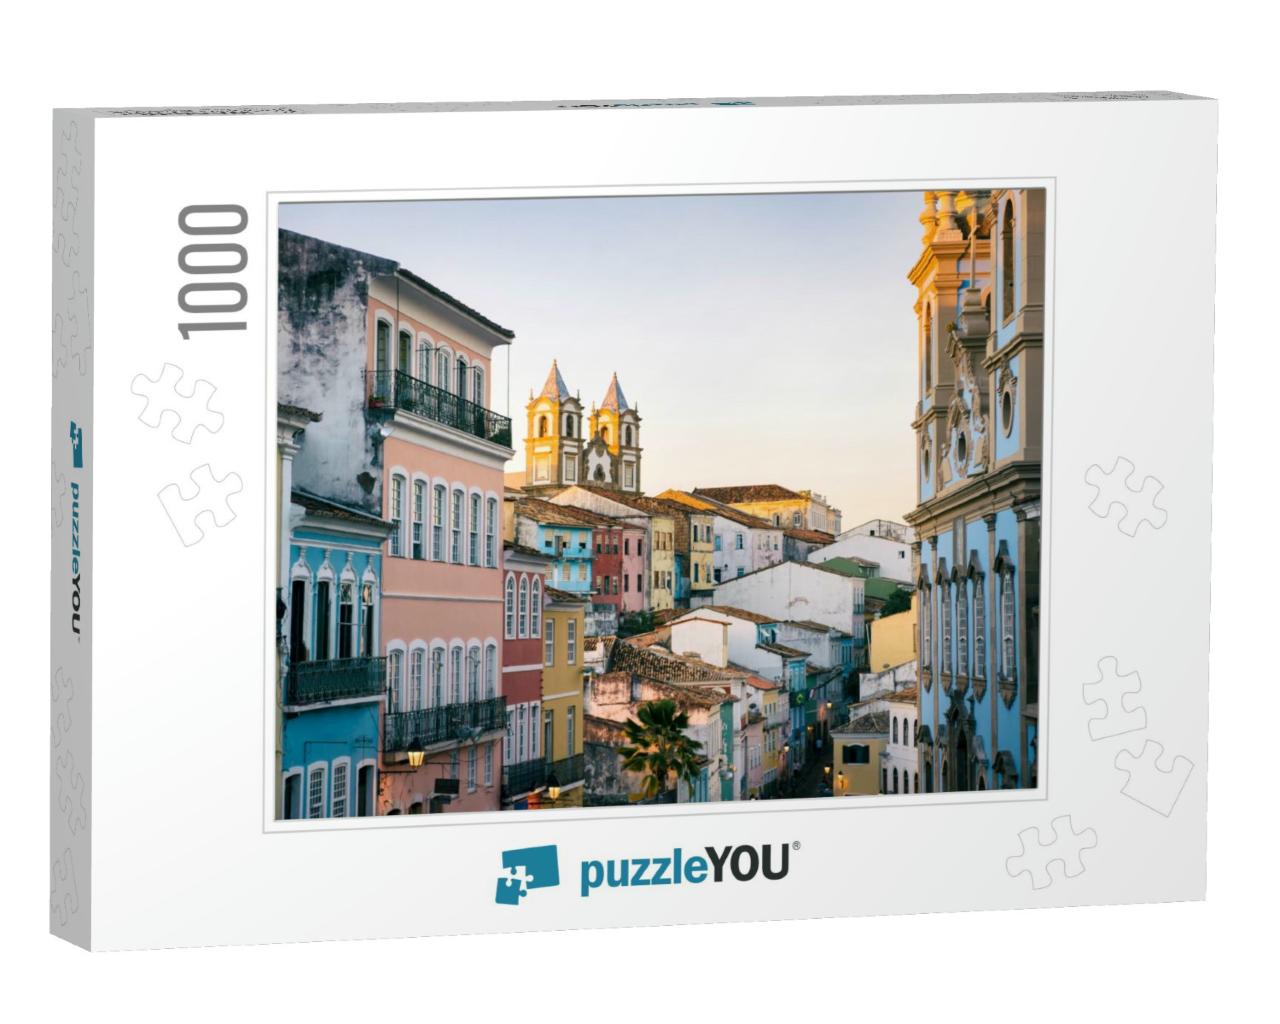 Scenic Dusk View of a Historic Plaza Surrounded by Coloni... Jigsaw Puzzle with 1000 pieces